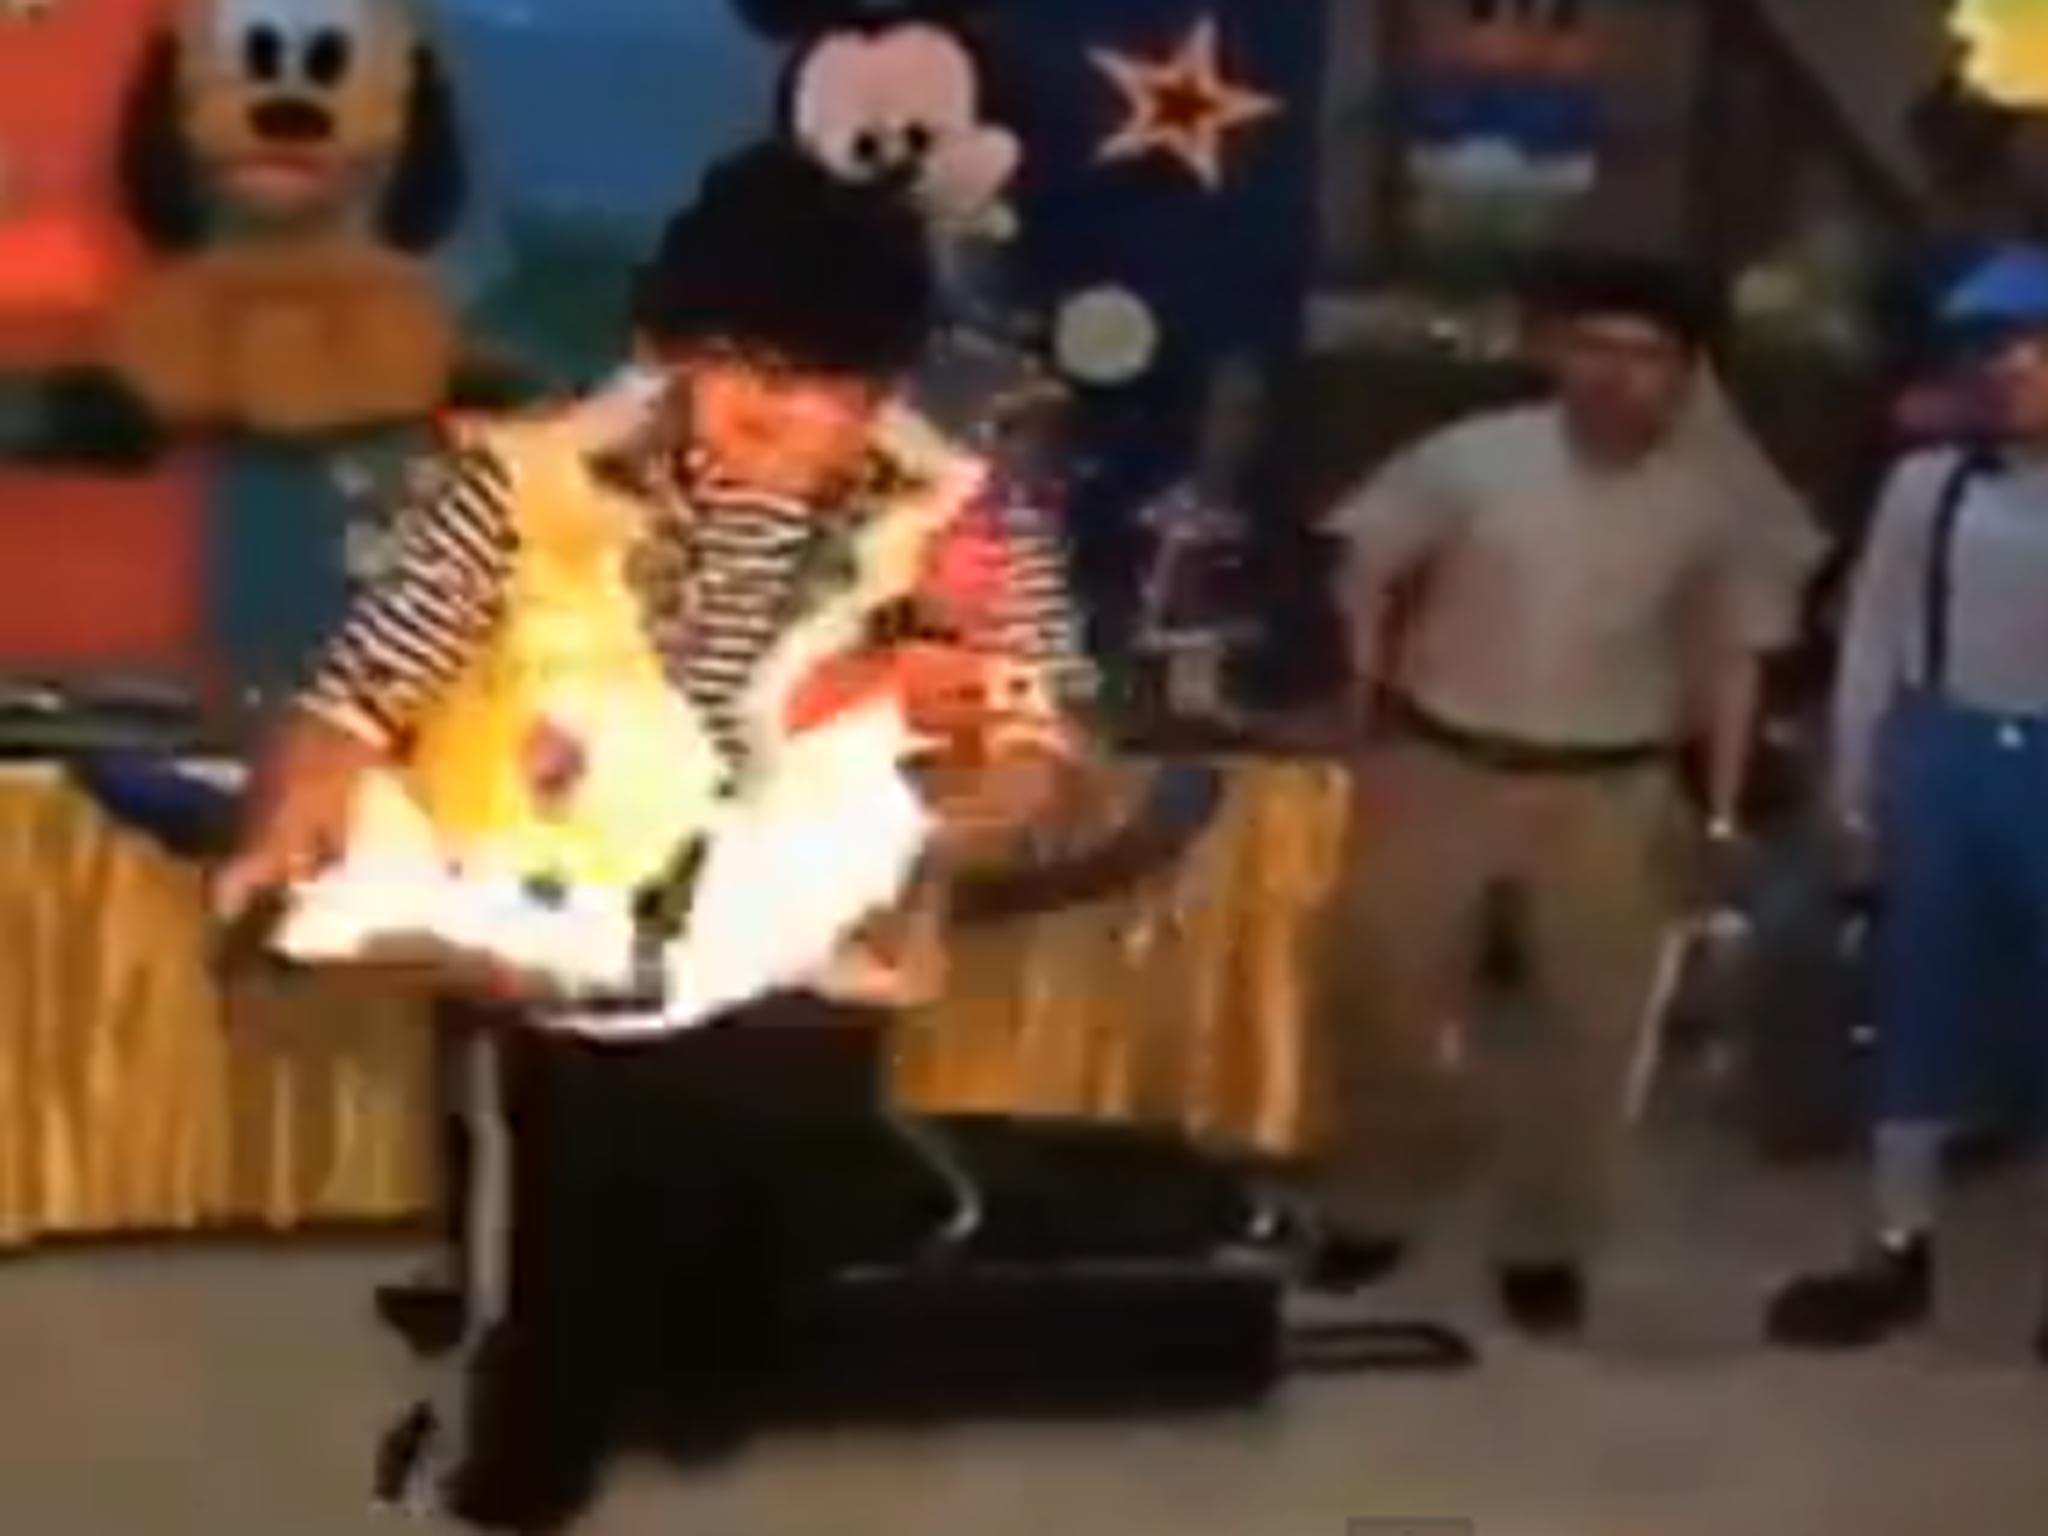 The clown is midway through his act when the a dove is set on fire